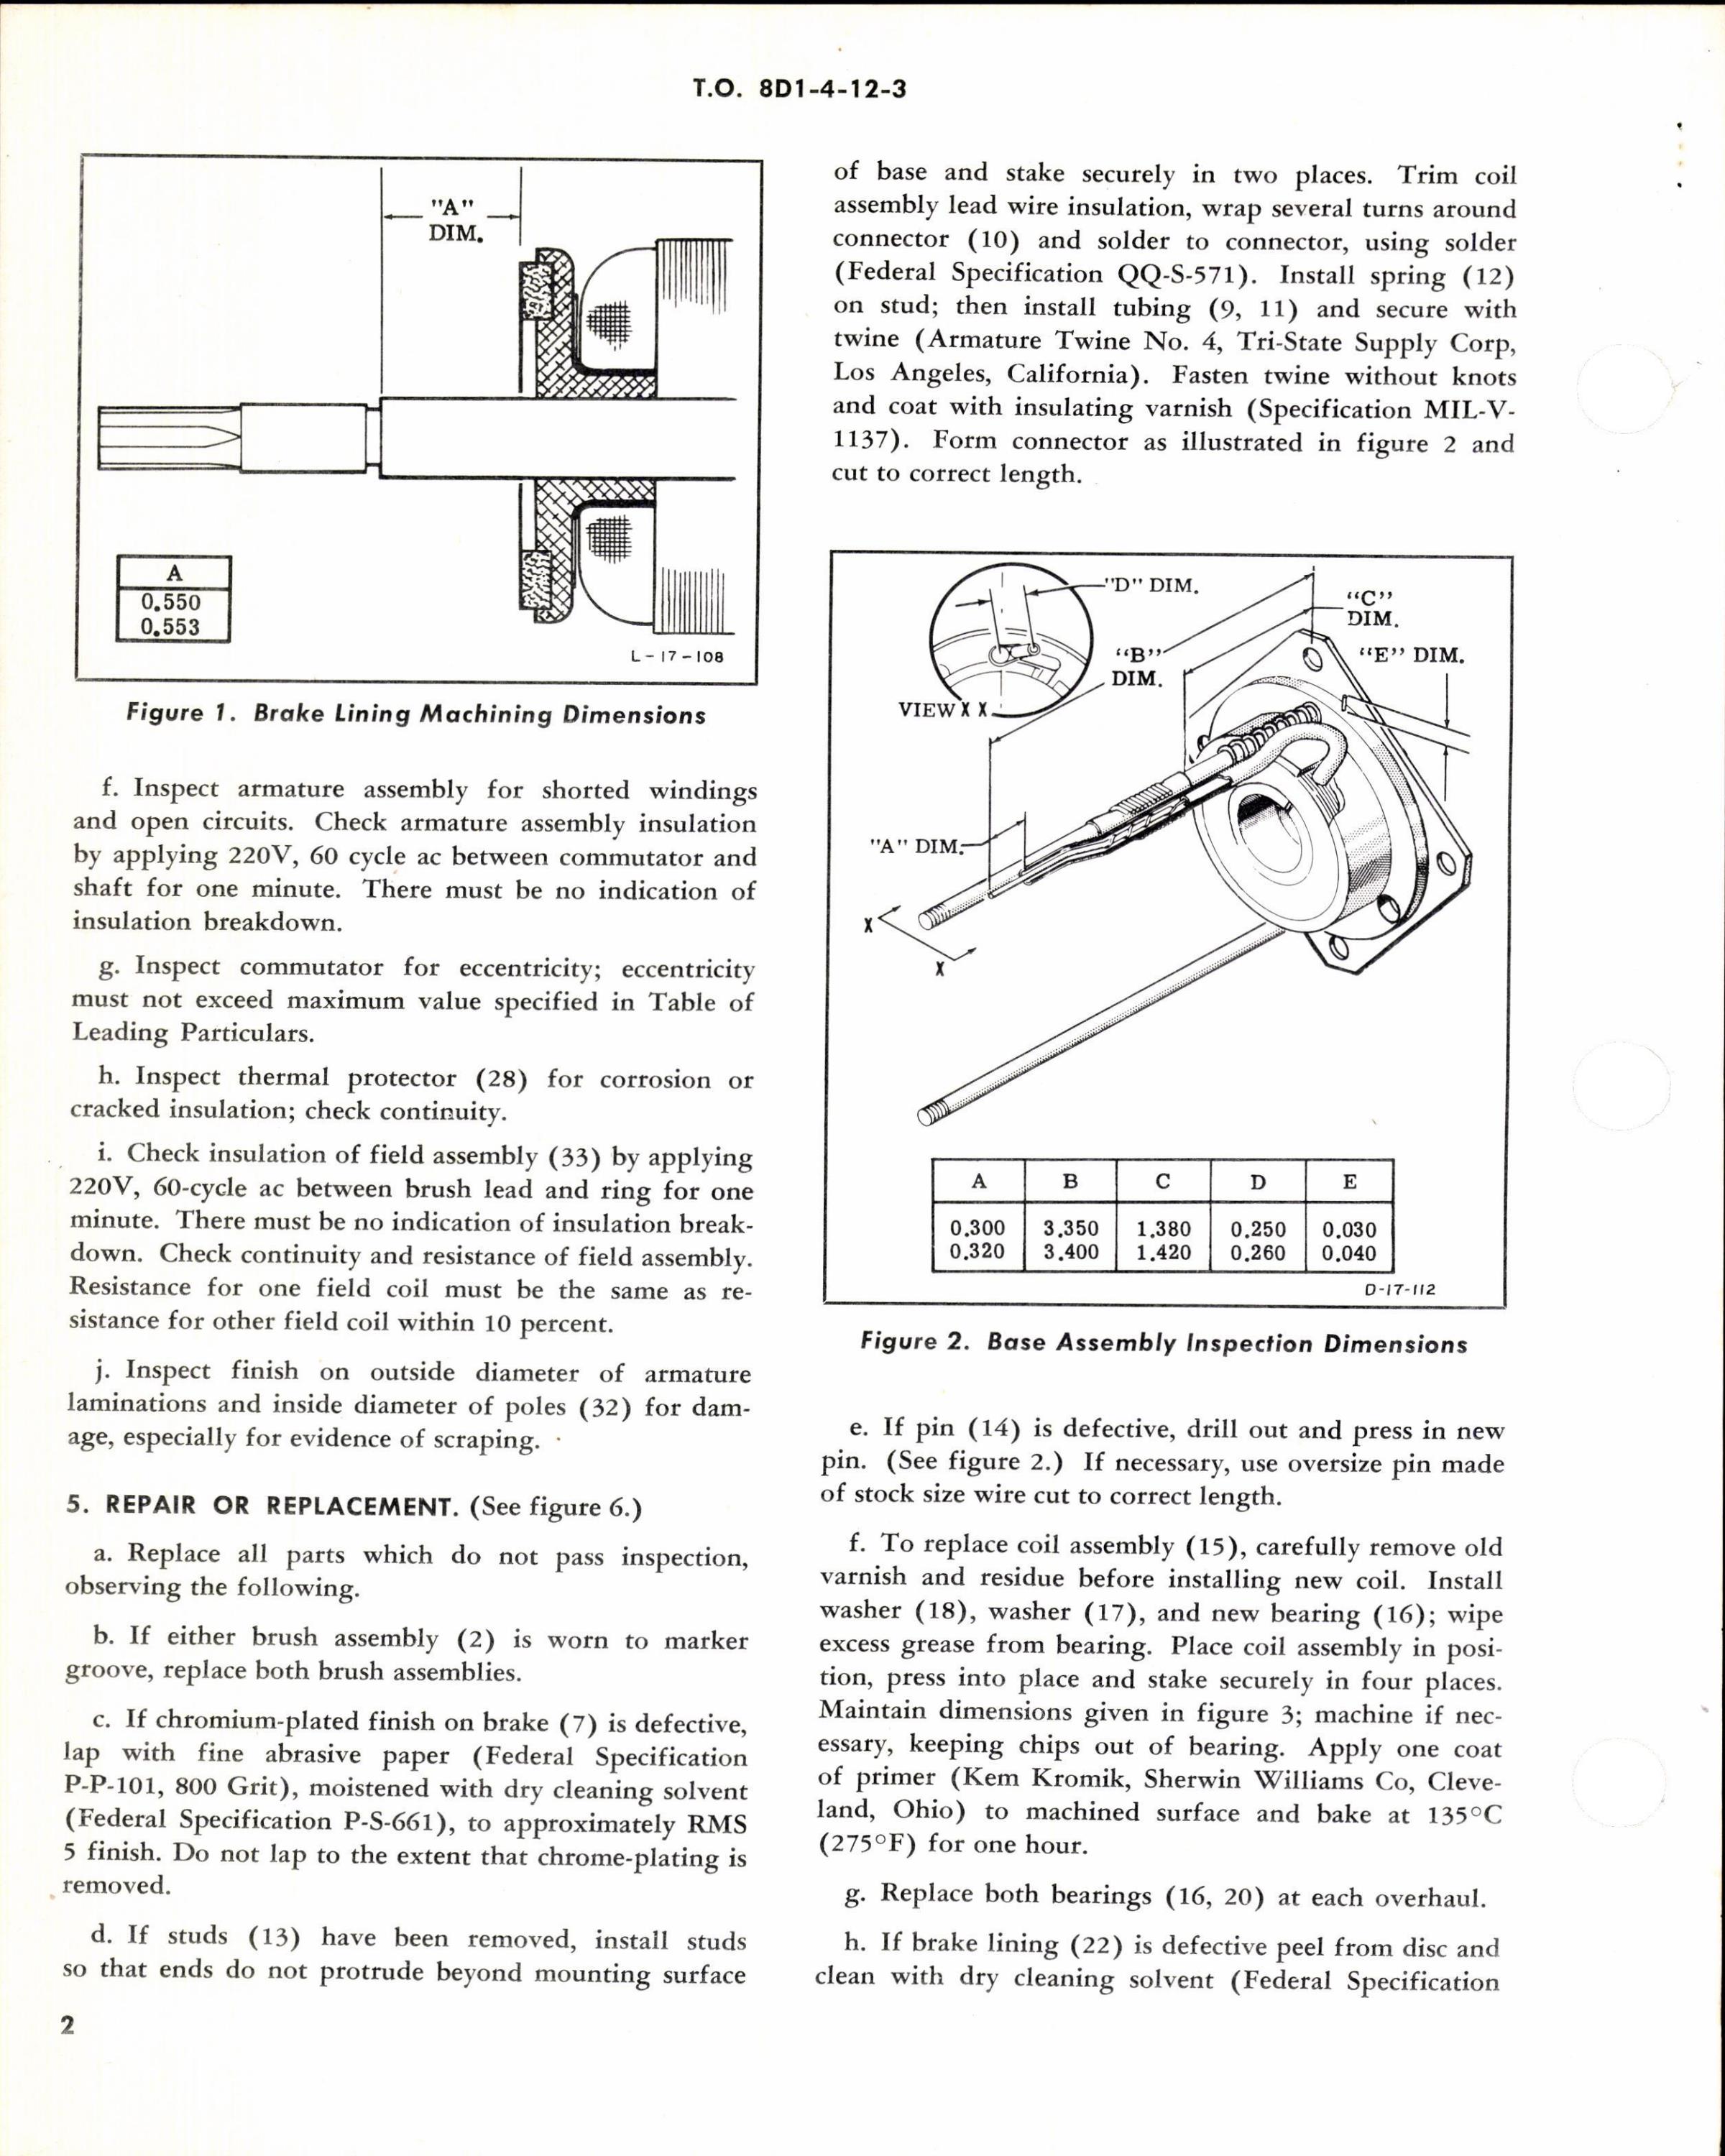 Sample page 2 from AirCorps Library document: Overhaul Instructions with Parts Breakdown for Direct-Current Motor Model DCM20-23, Part No 32409